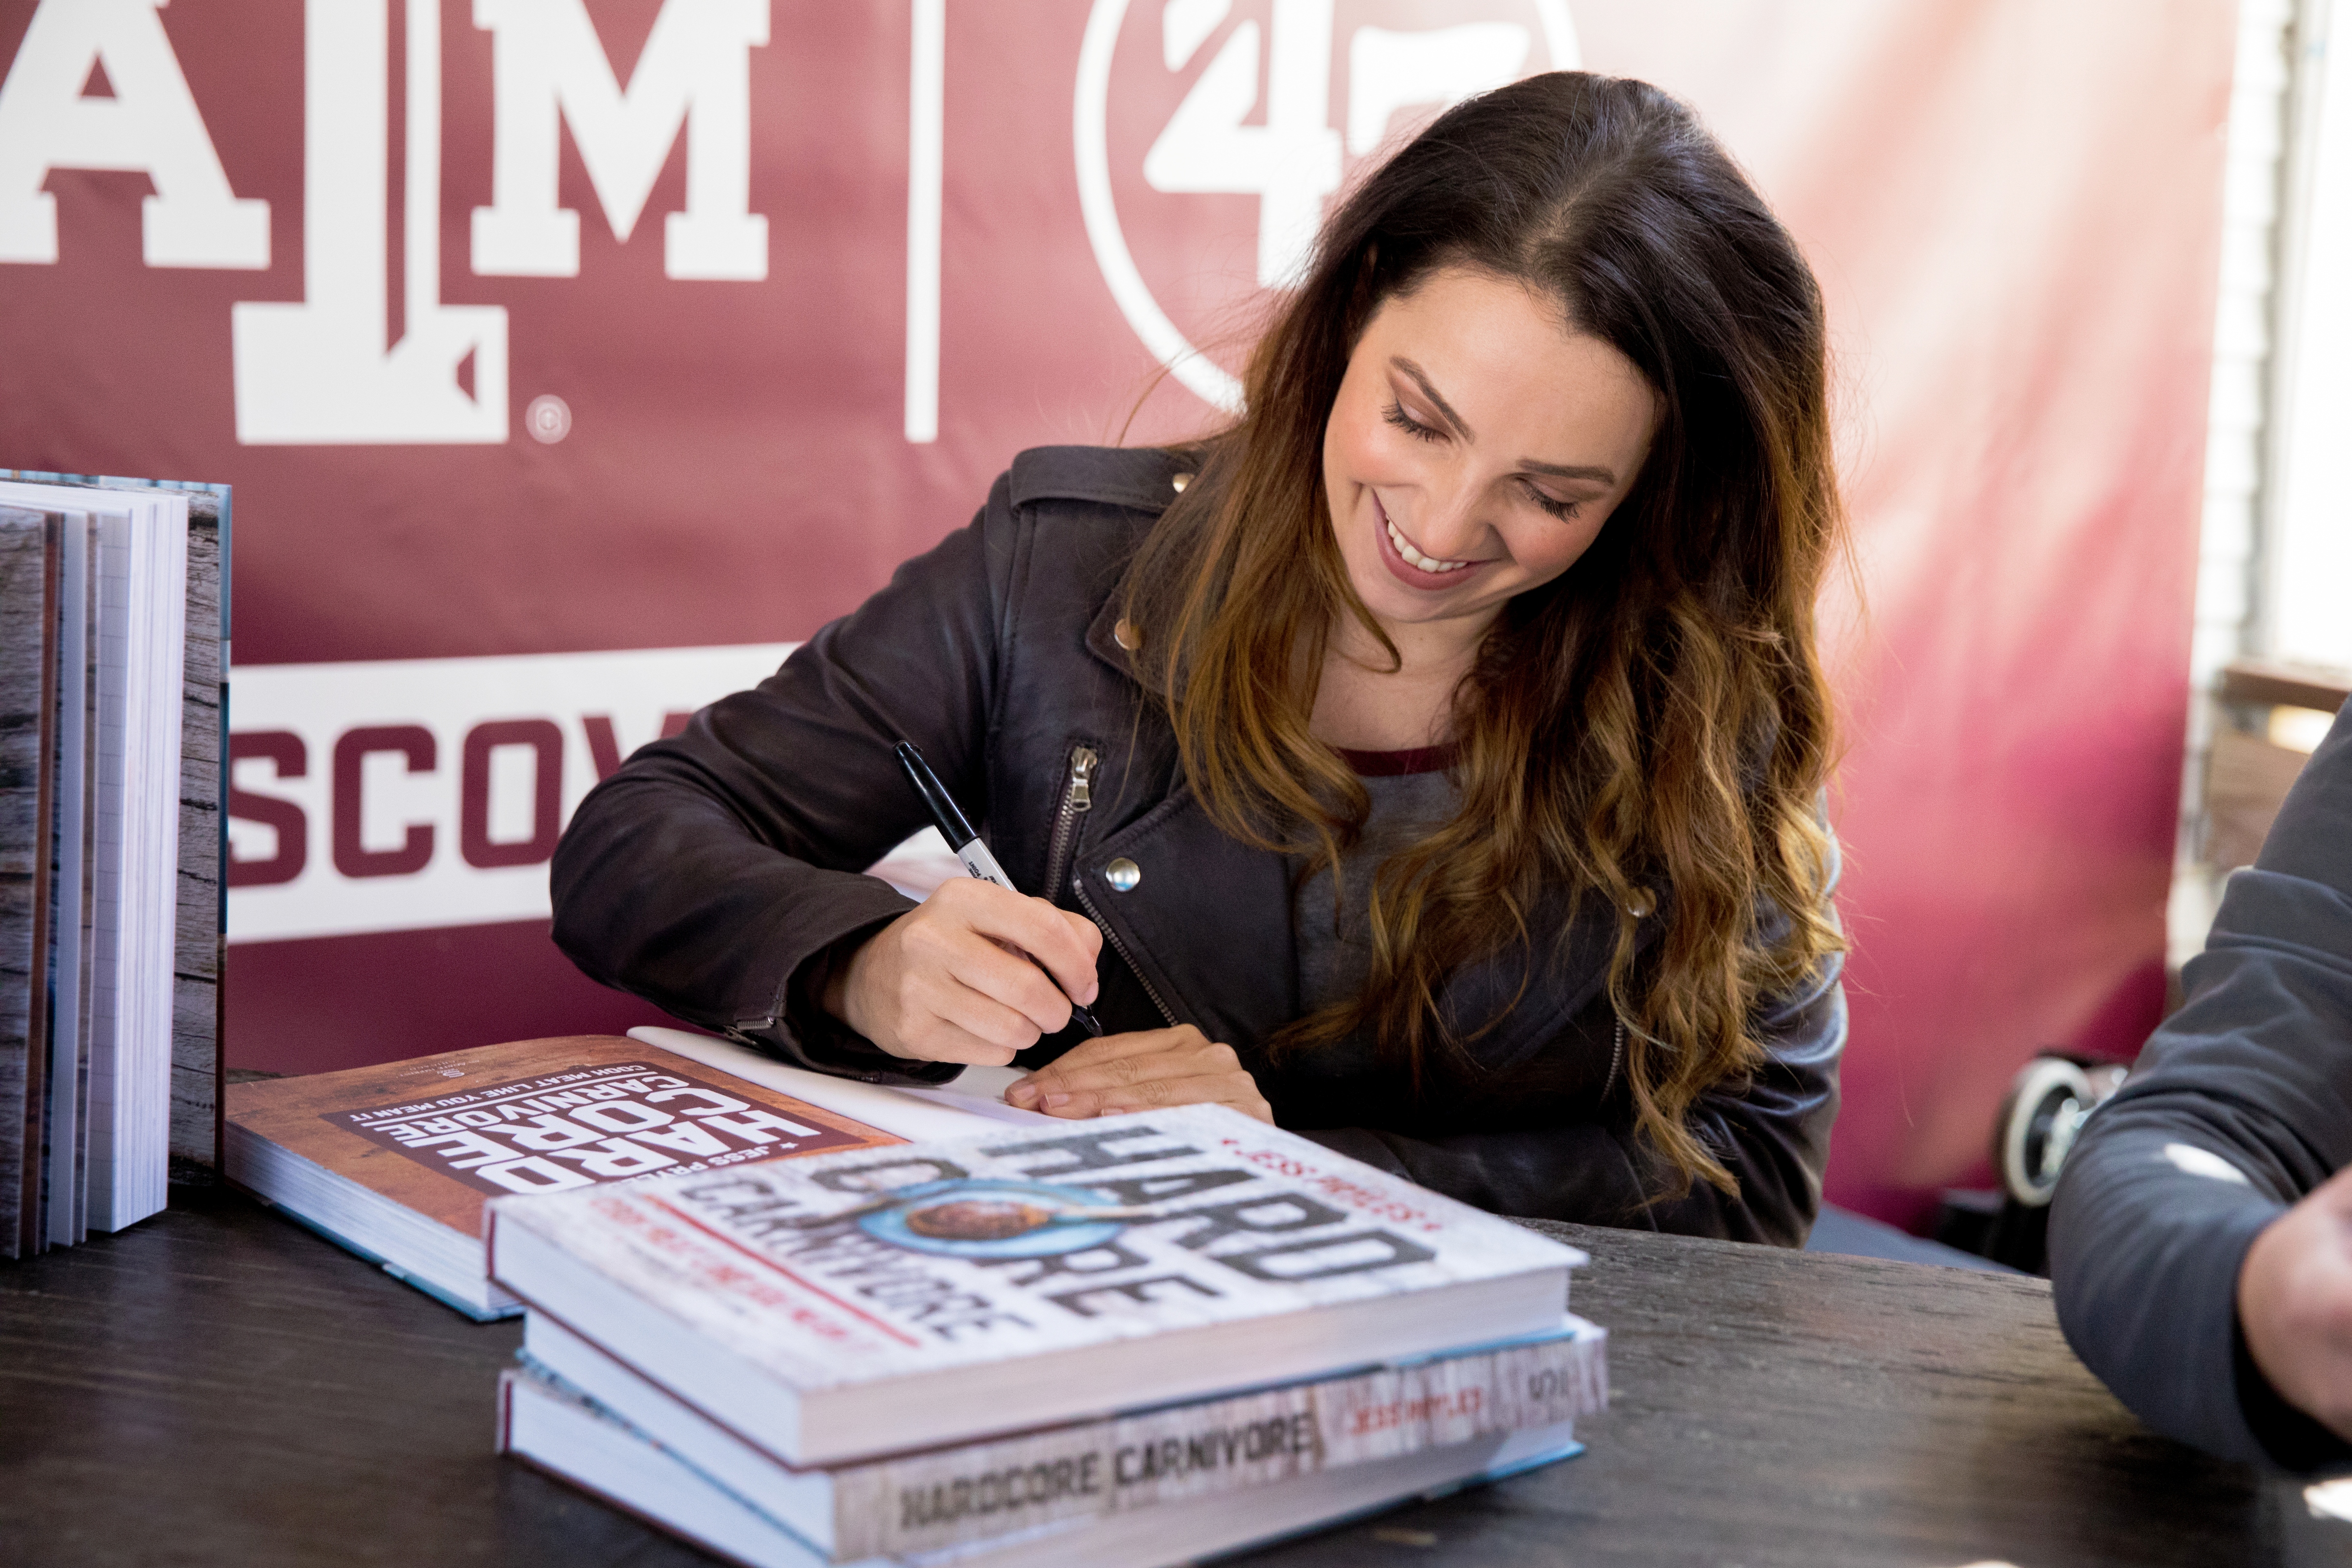 Jess Pryles signing her book, "Hardcore Carnivore" at Texas A&M University event at SXSW